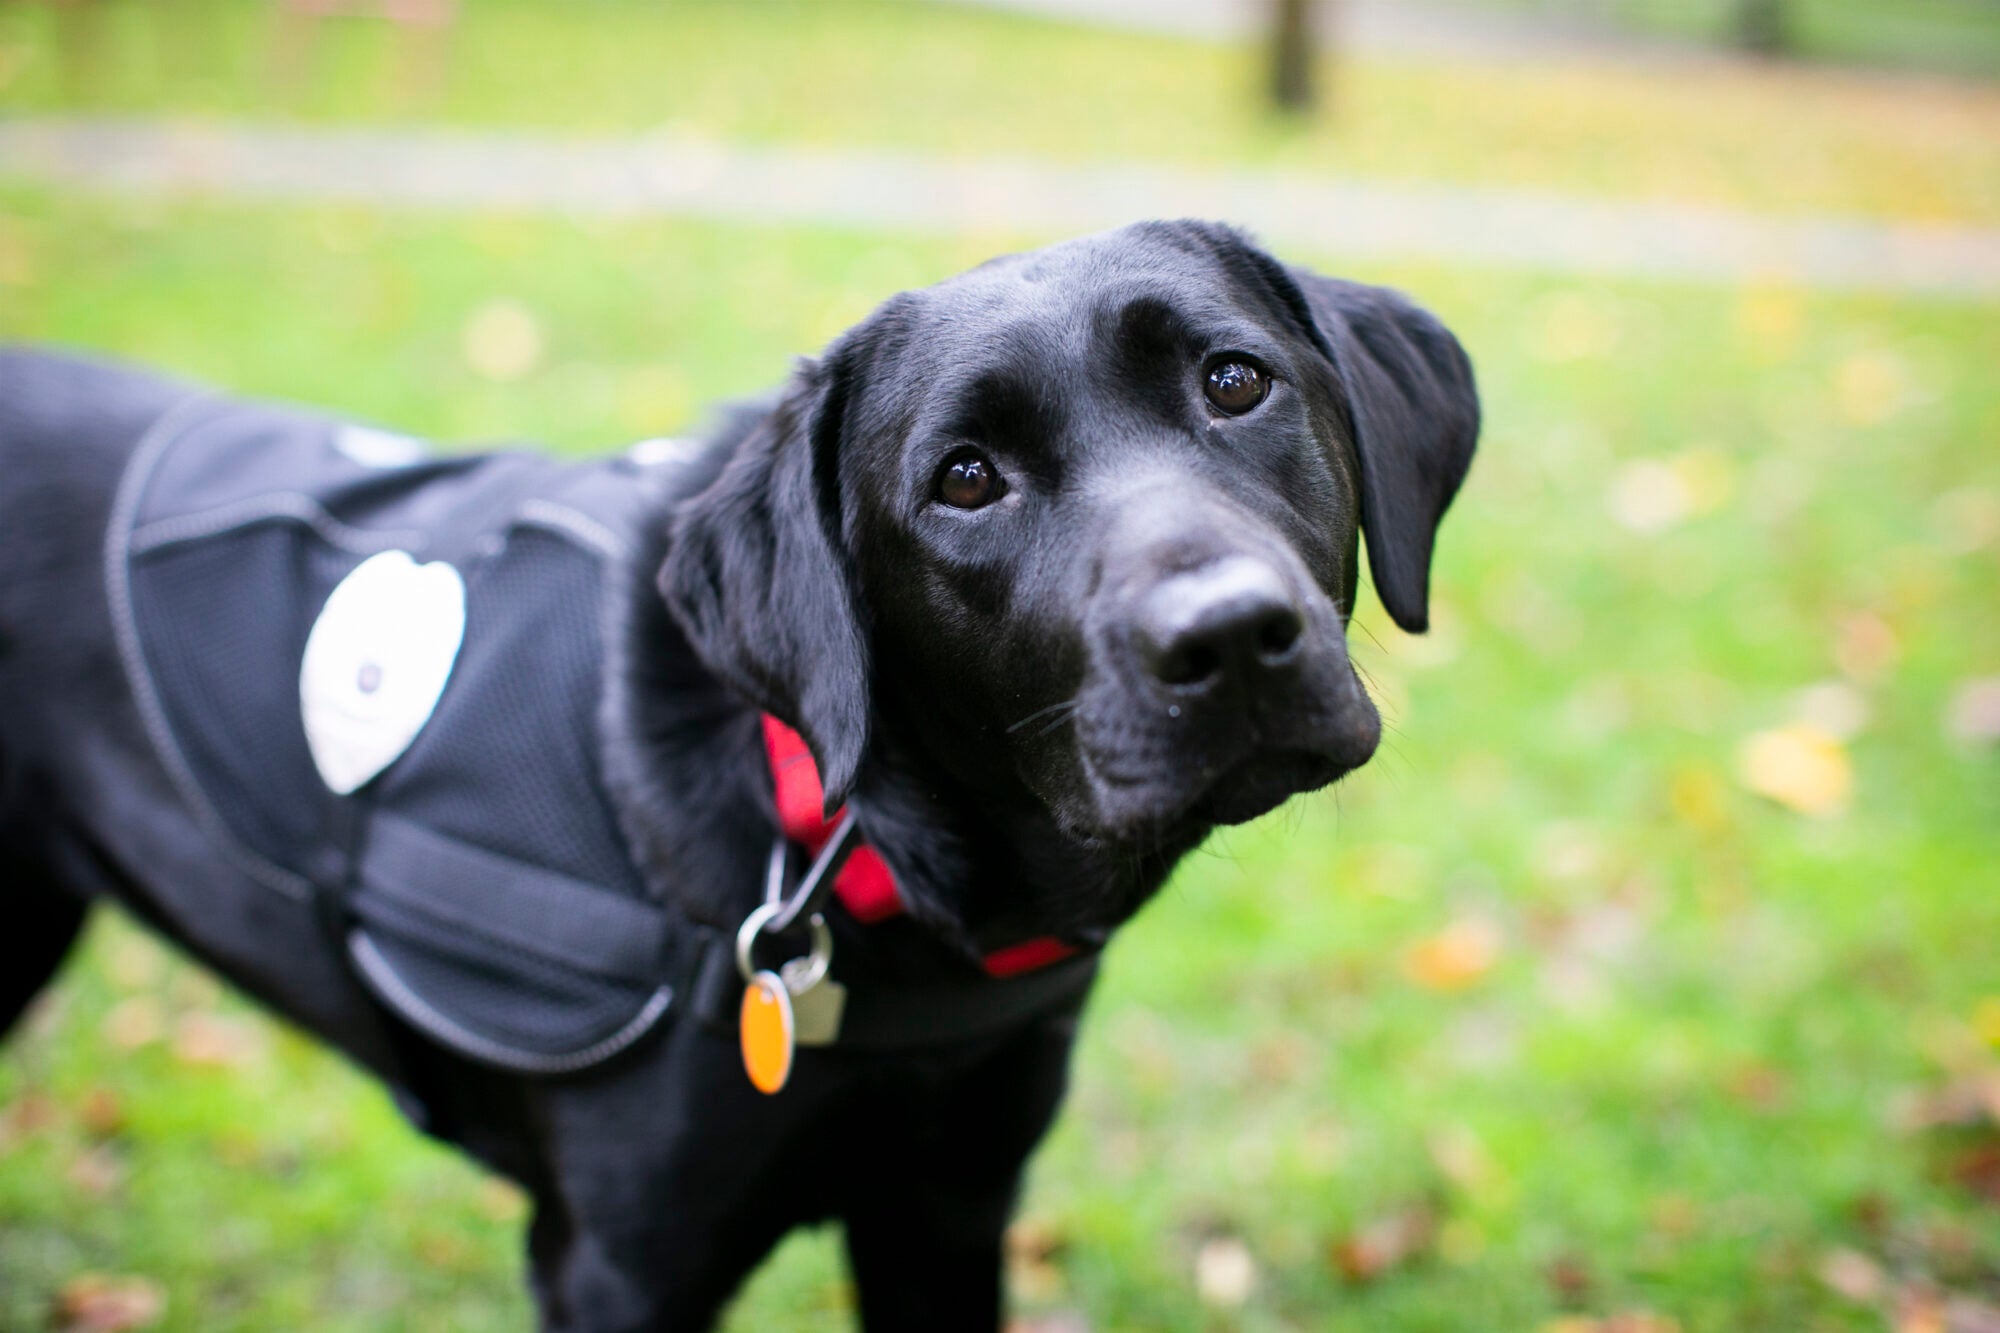 A black lab wearing a vest looks up at the camera with his head tilted